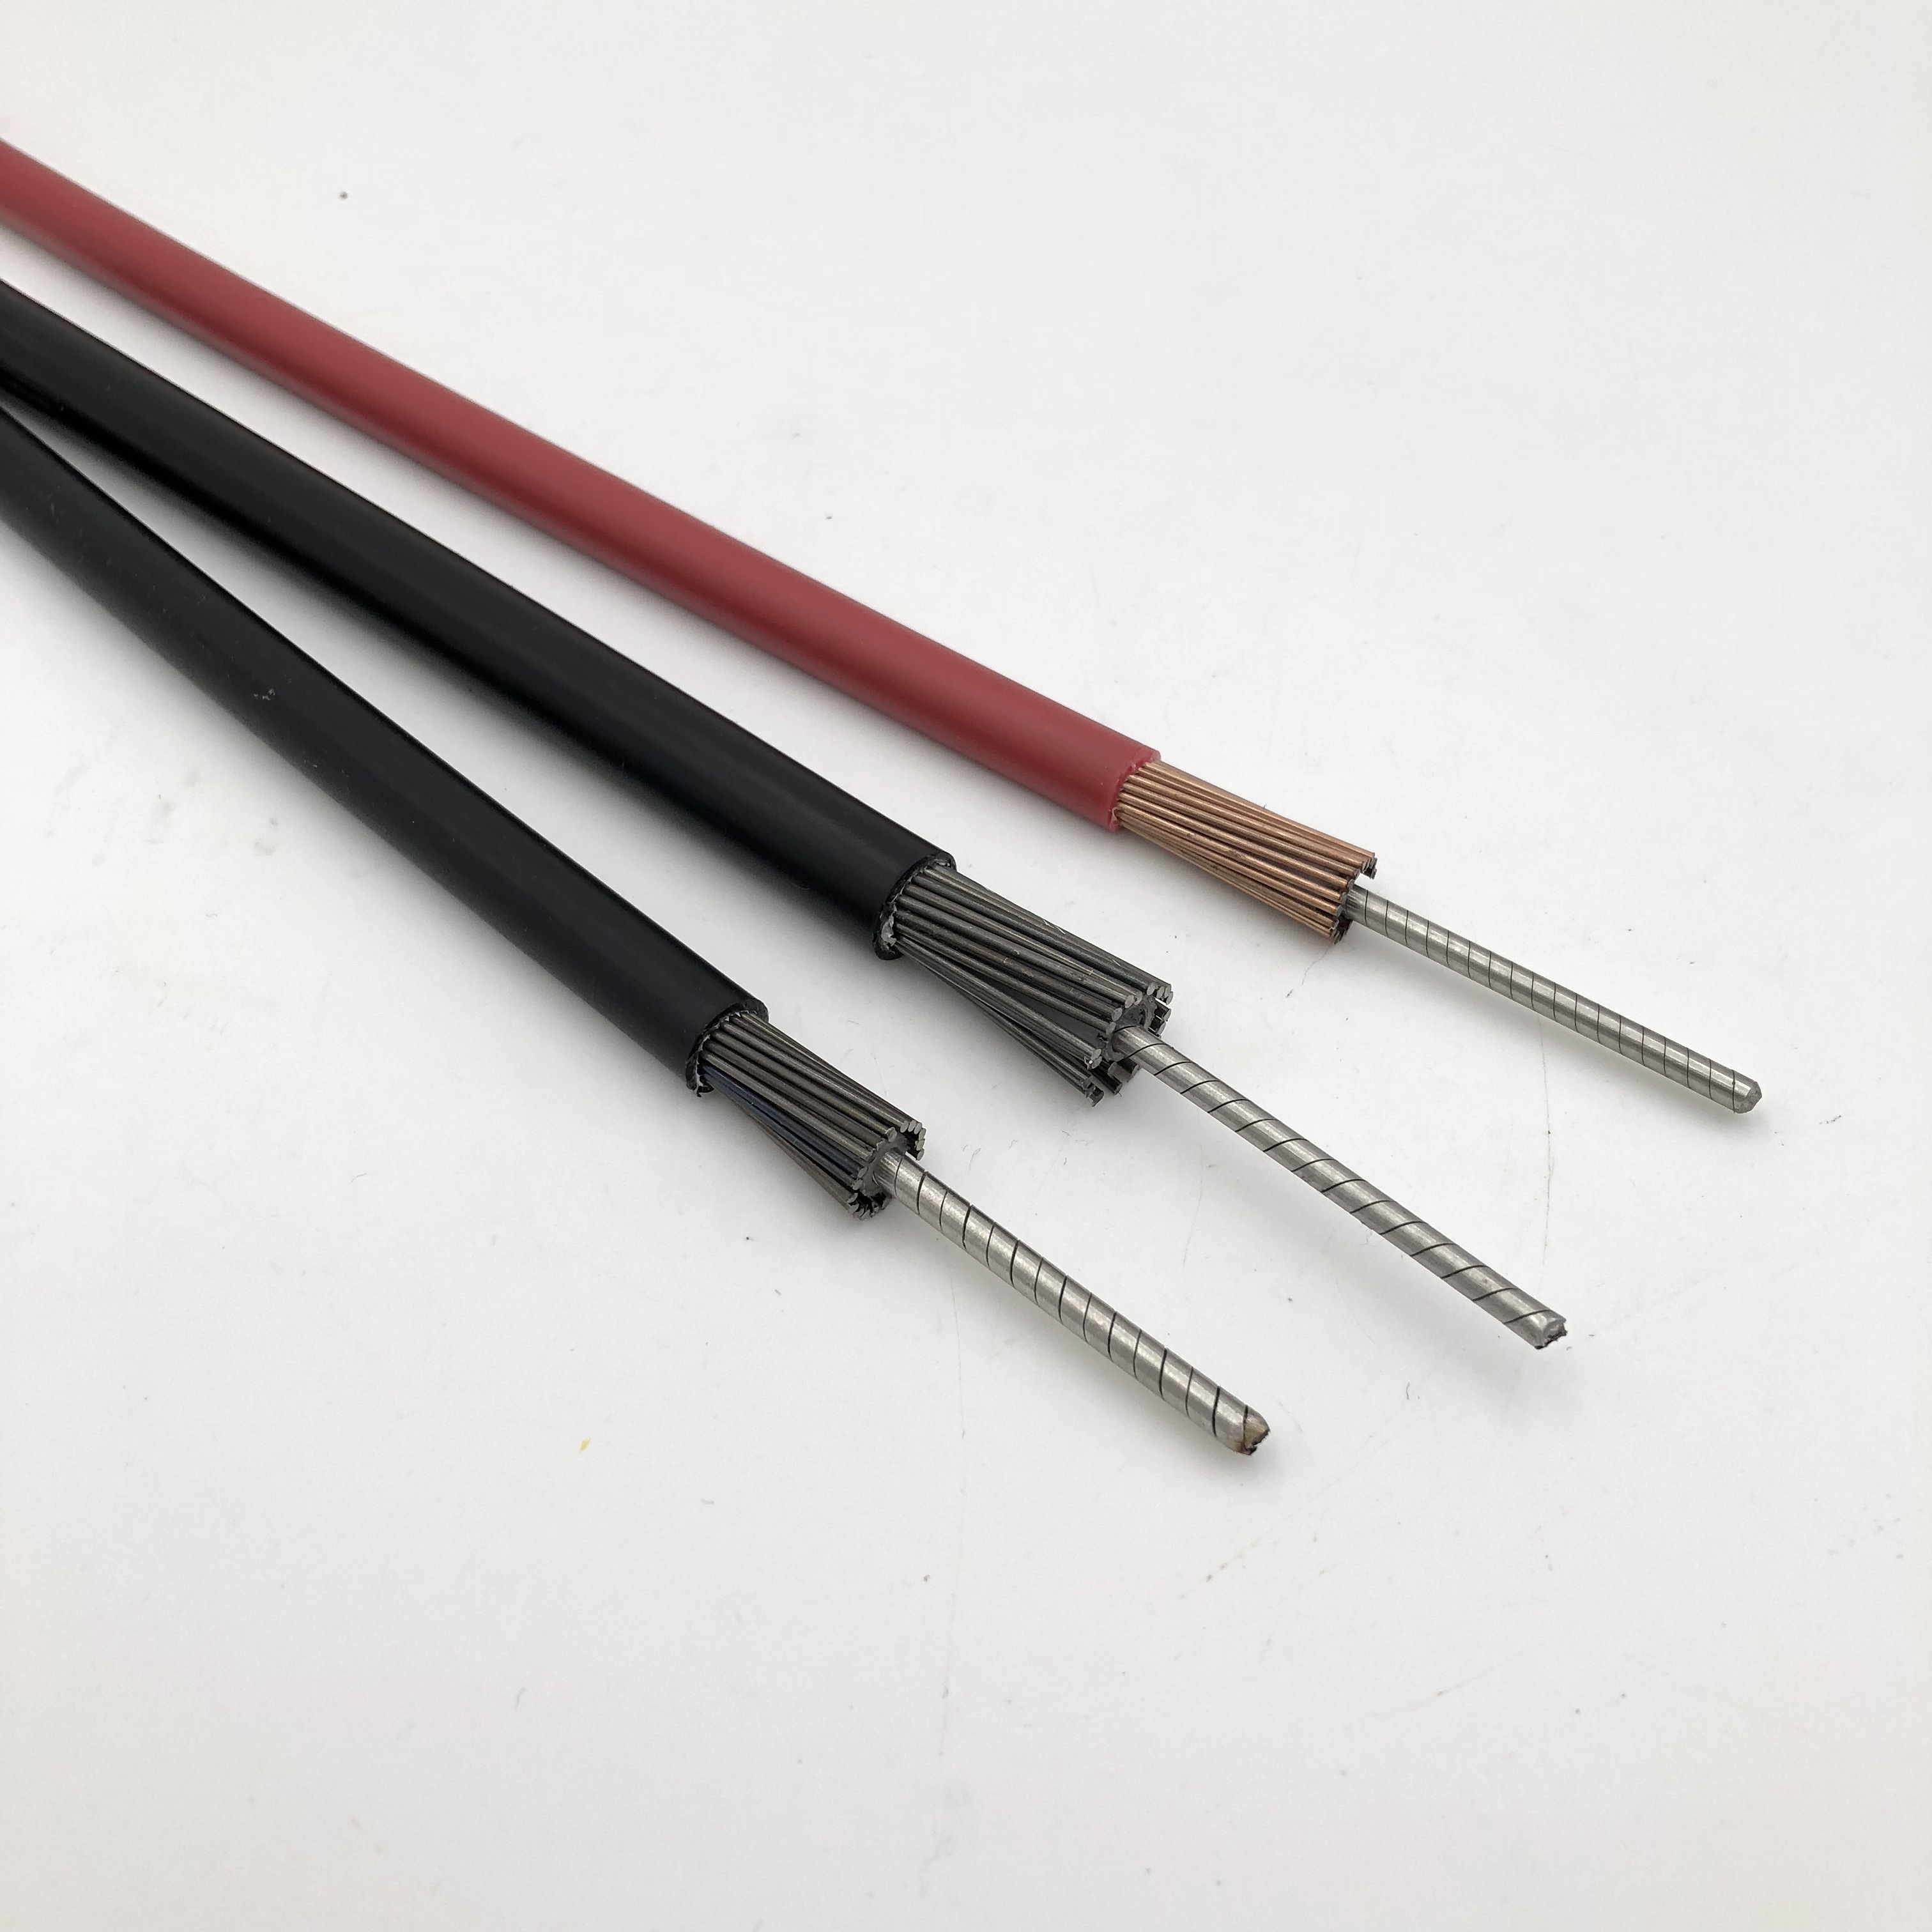 HIGH QUALITY PUSH PULL CONTROL CABLE